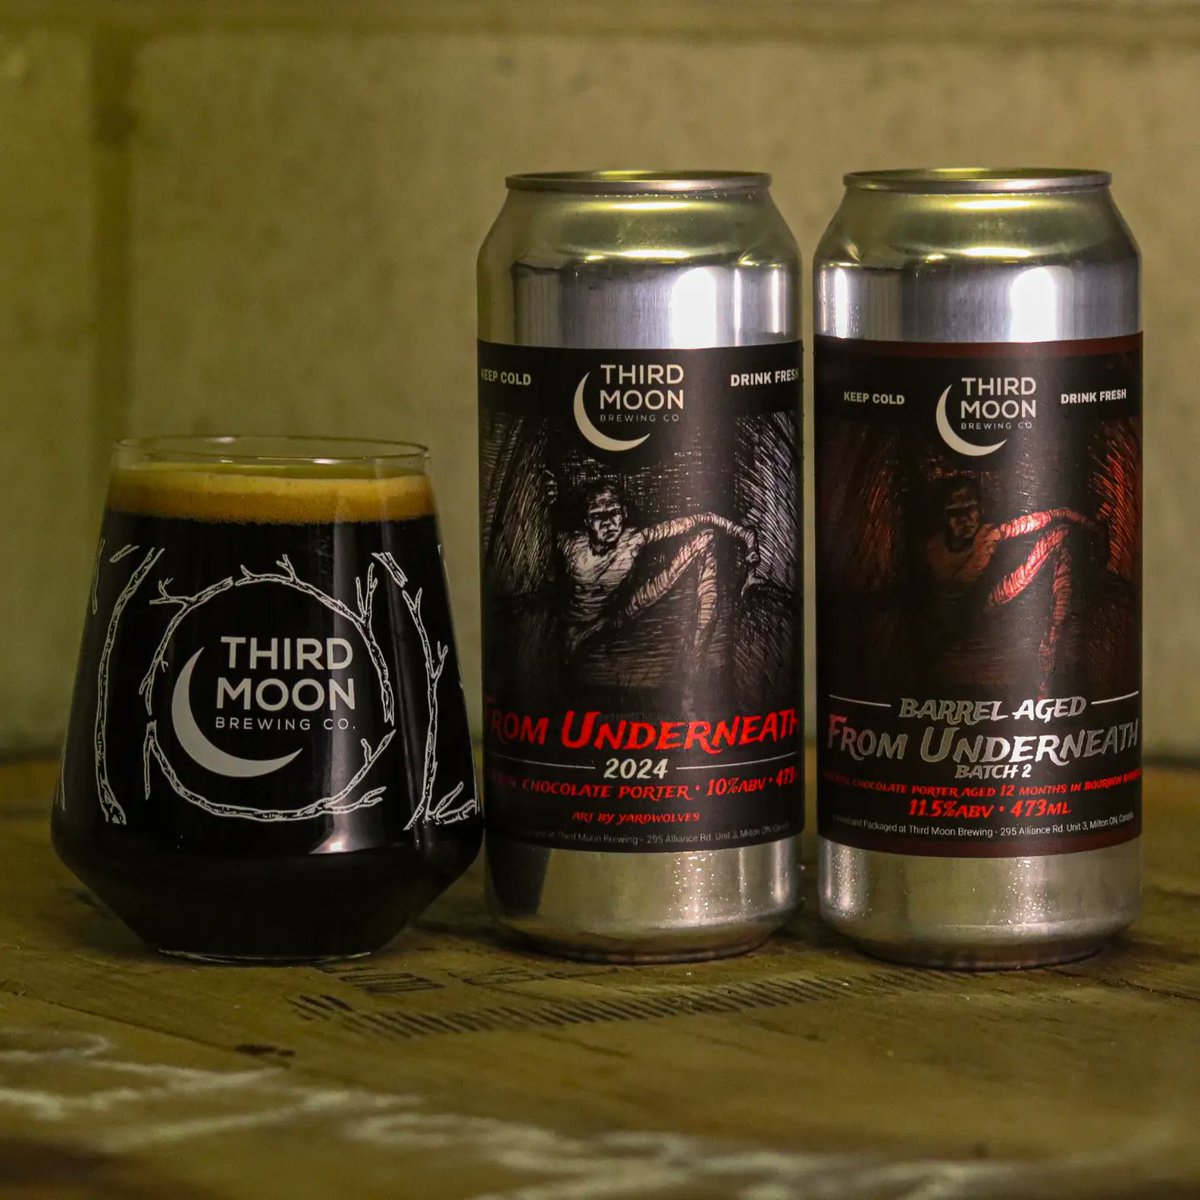 First releases this week are a couple of imperial chocolate porters - From Underneath and Barrel Aged From Underneath! See our Instagram for full details 🍻